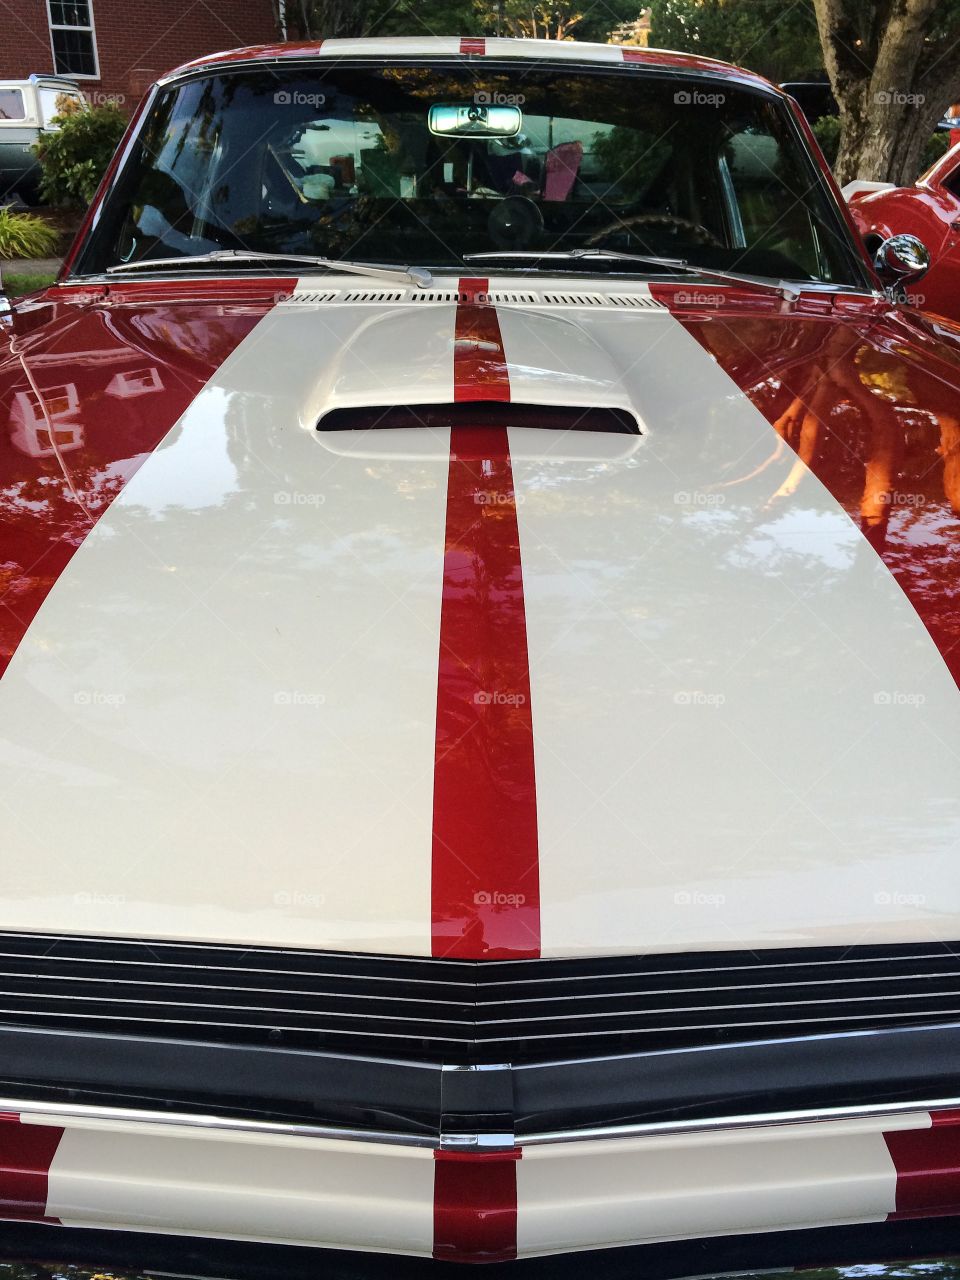 Striped to race. Classic sports car waxed and ready to race
